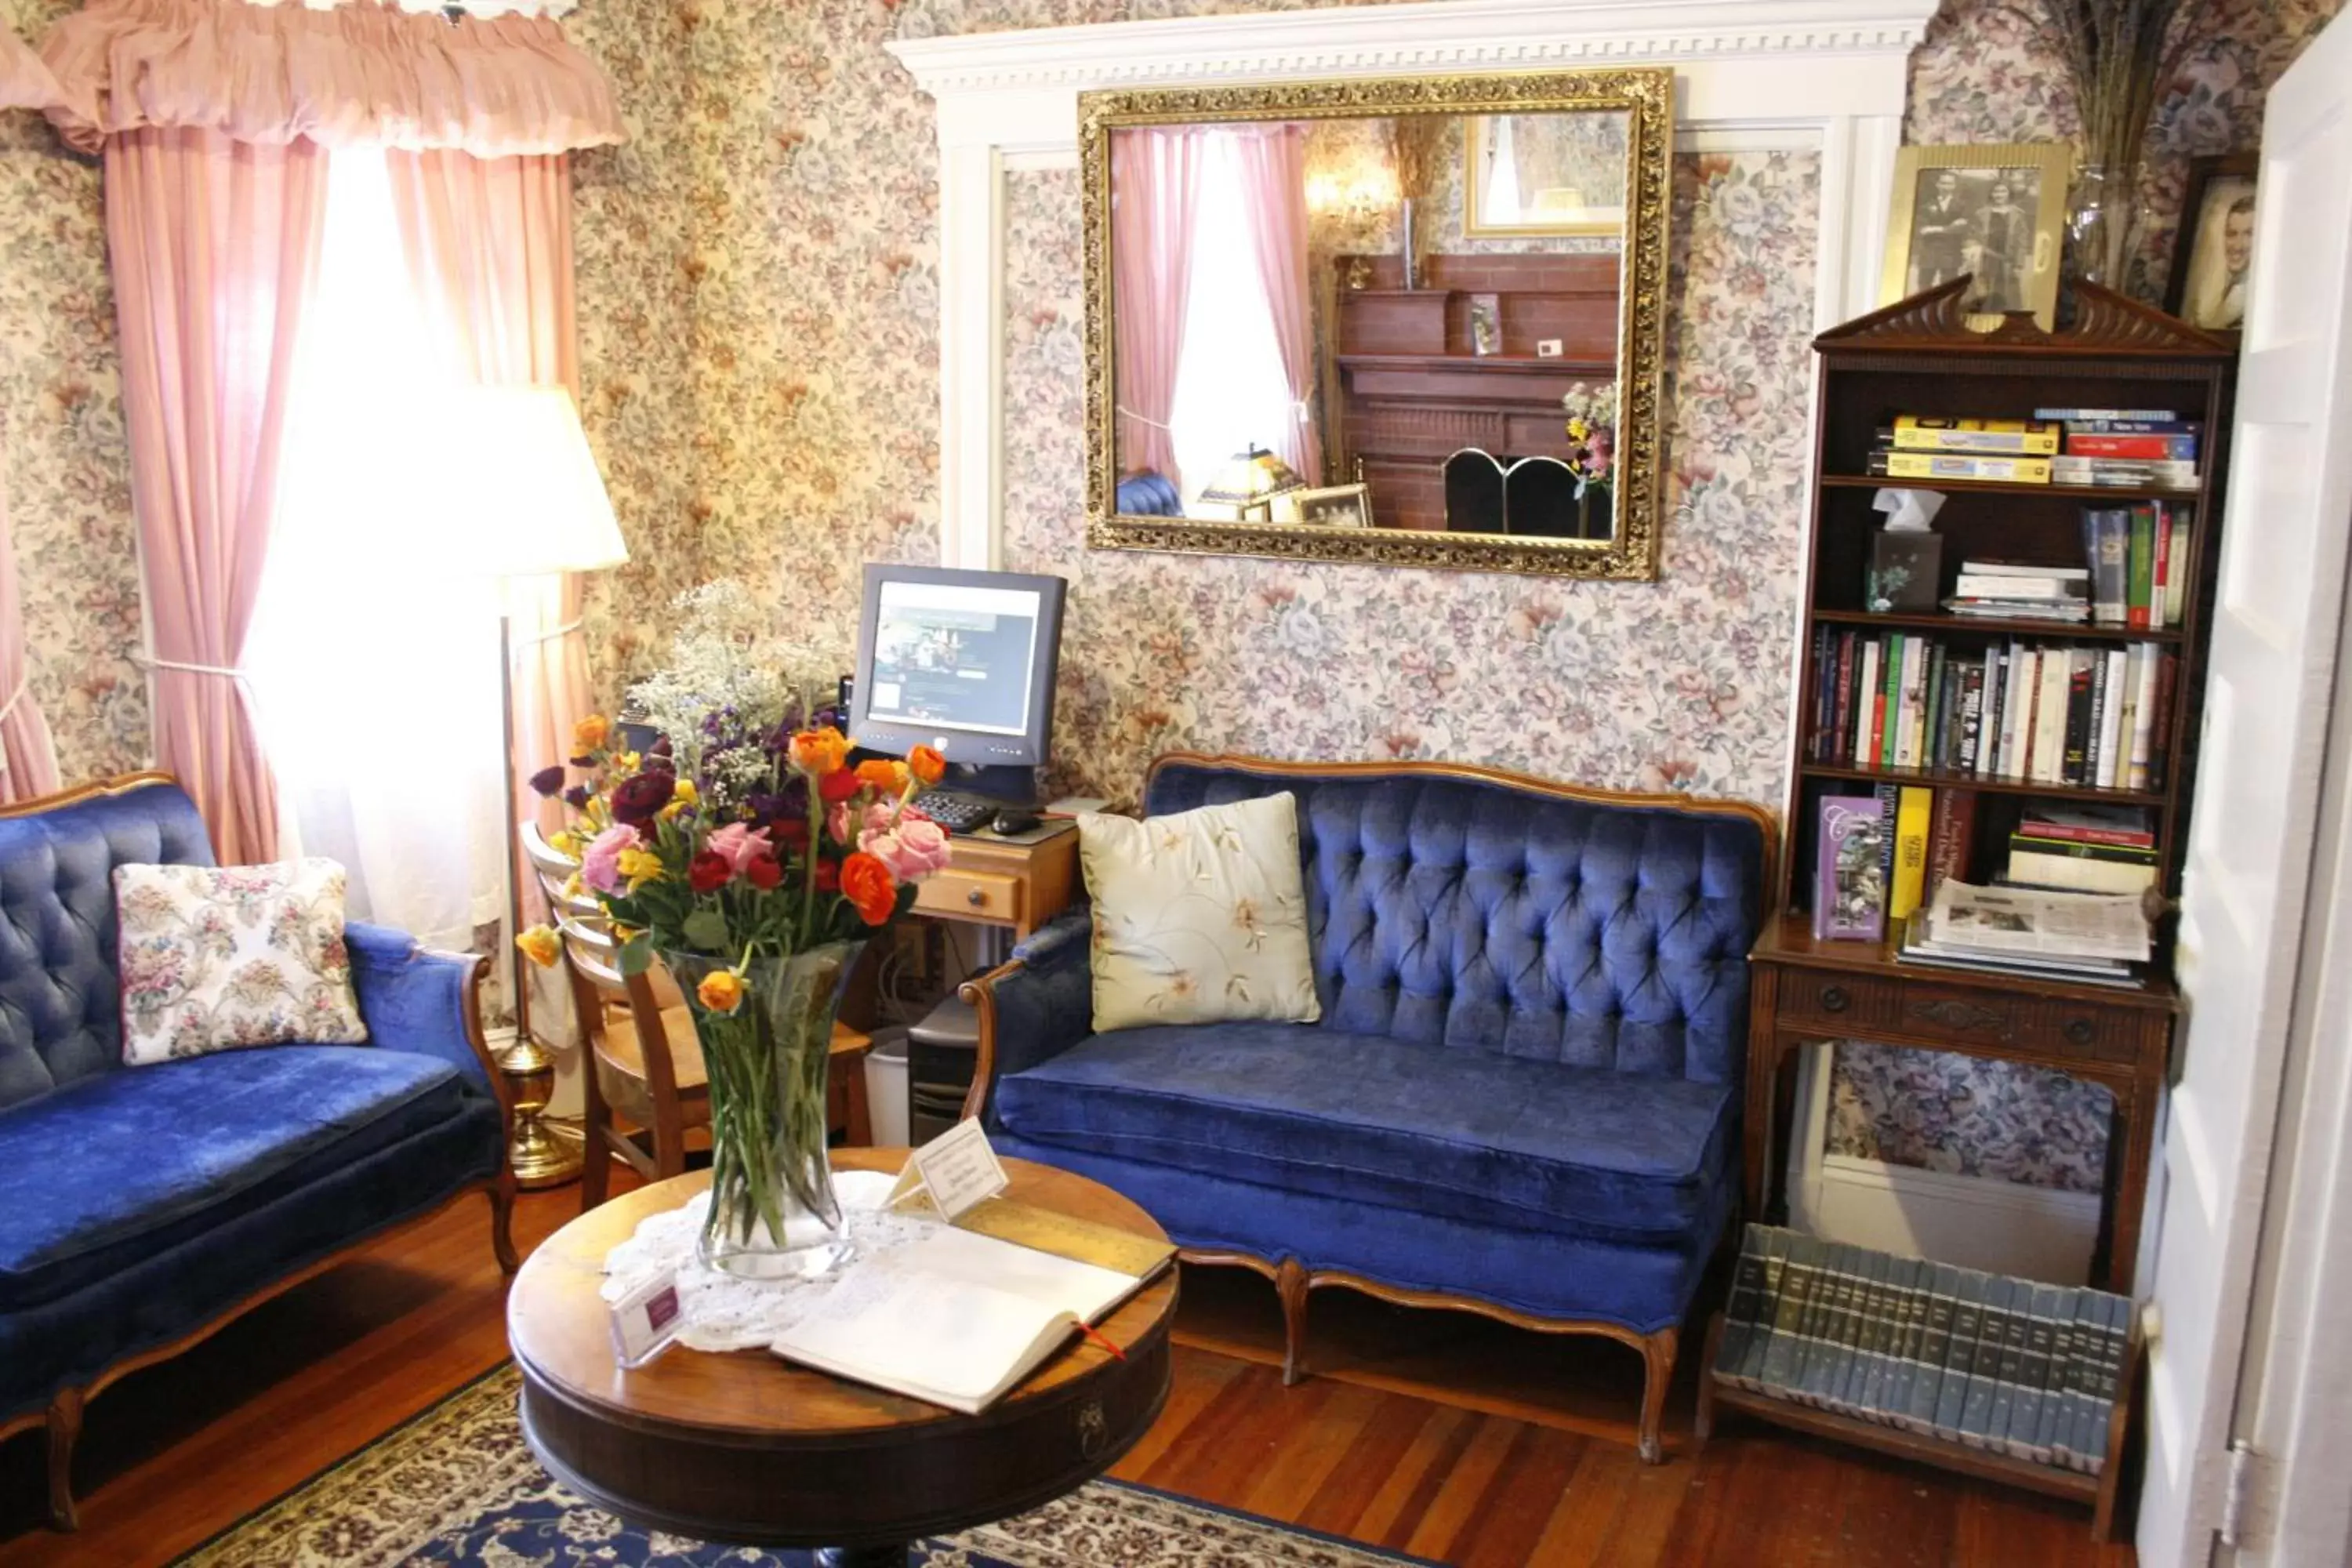 Library, Seating Area in The Coolidge Corner Guest House: A Brookline Bed and Breakfast